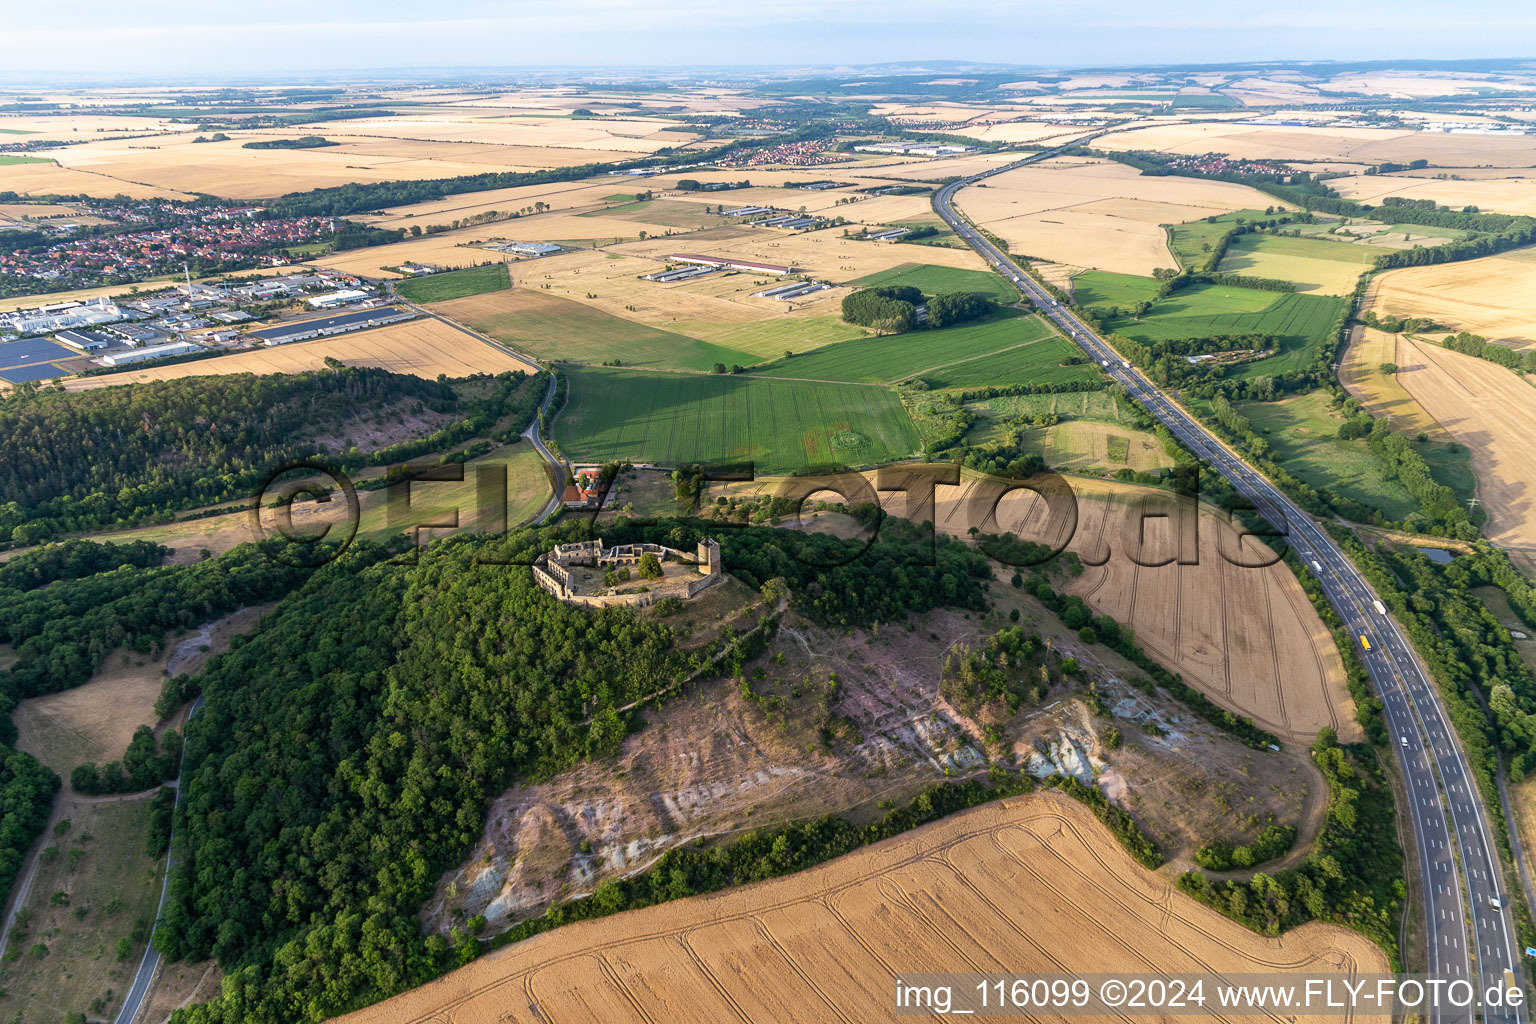 Ruins and vestiges of the former castle and fortress Burg Gleichen on Thomas-Muentzer-Strasse in the district Wandersleben in Drei Gleichen in the state Thuringia, Germany out of the air